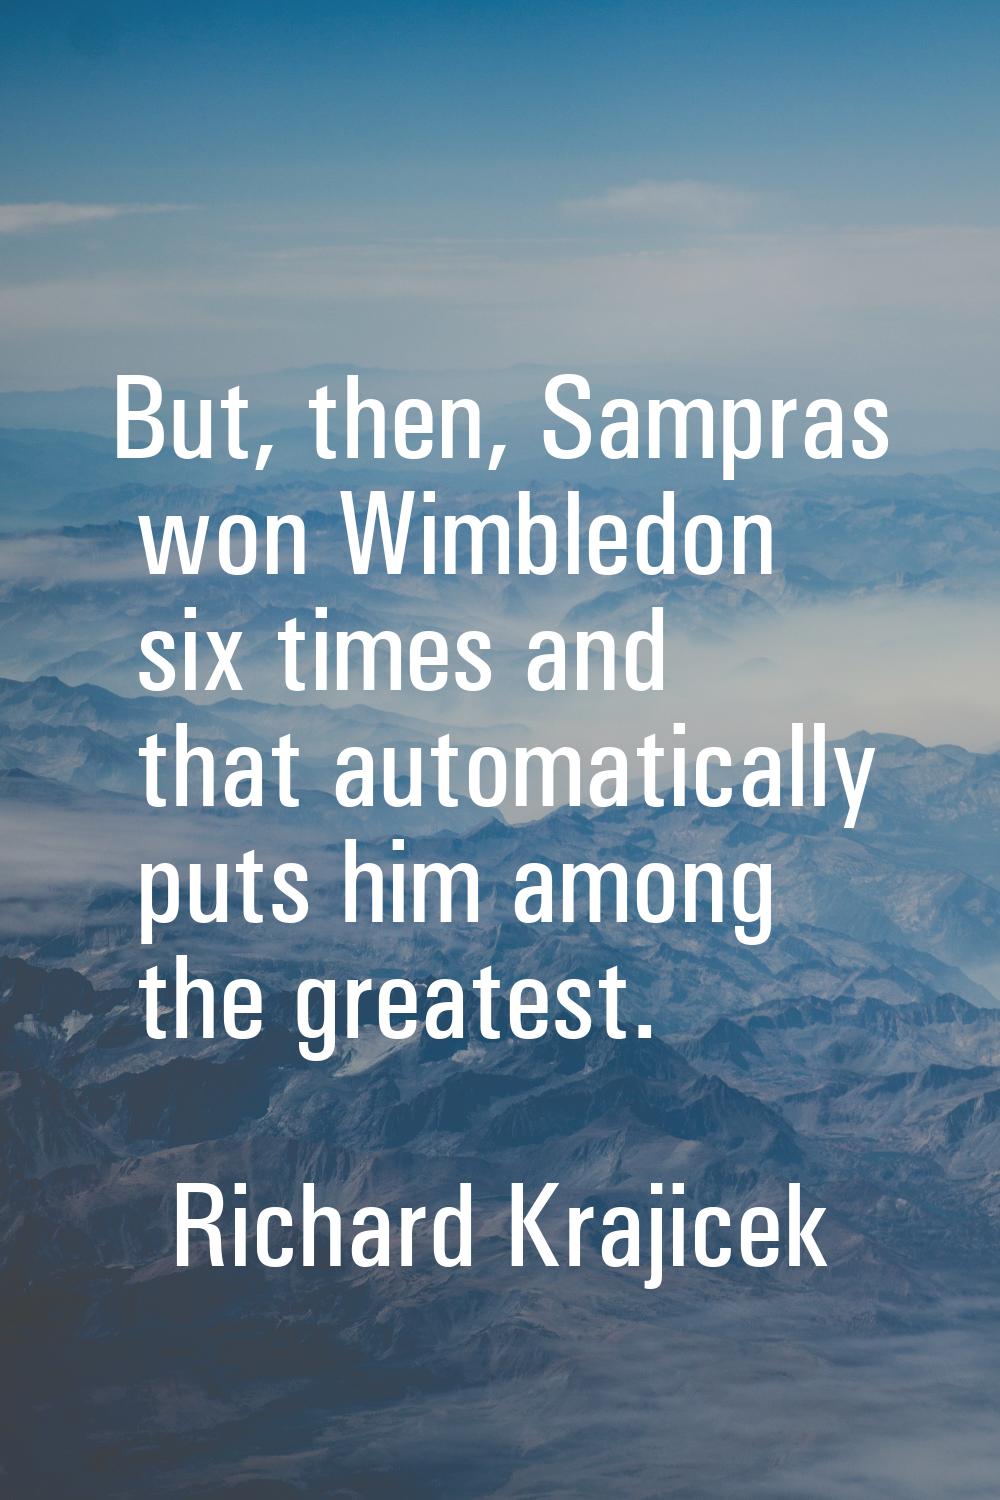 But, then, Sampras won Wimbledon six times and that automatically puts him among the greatest.